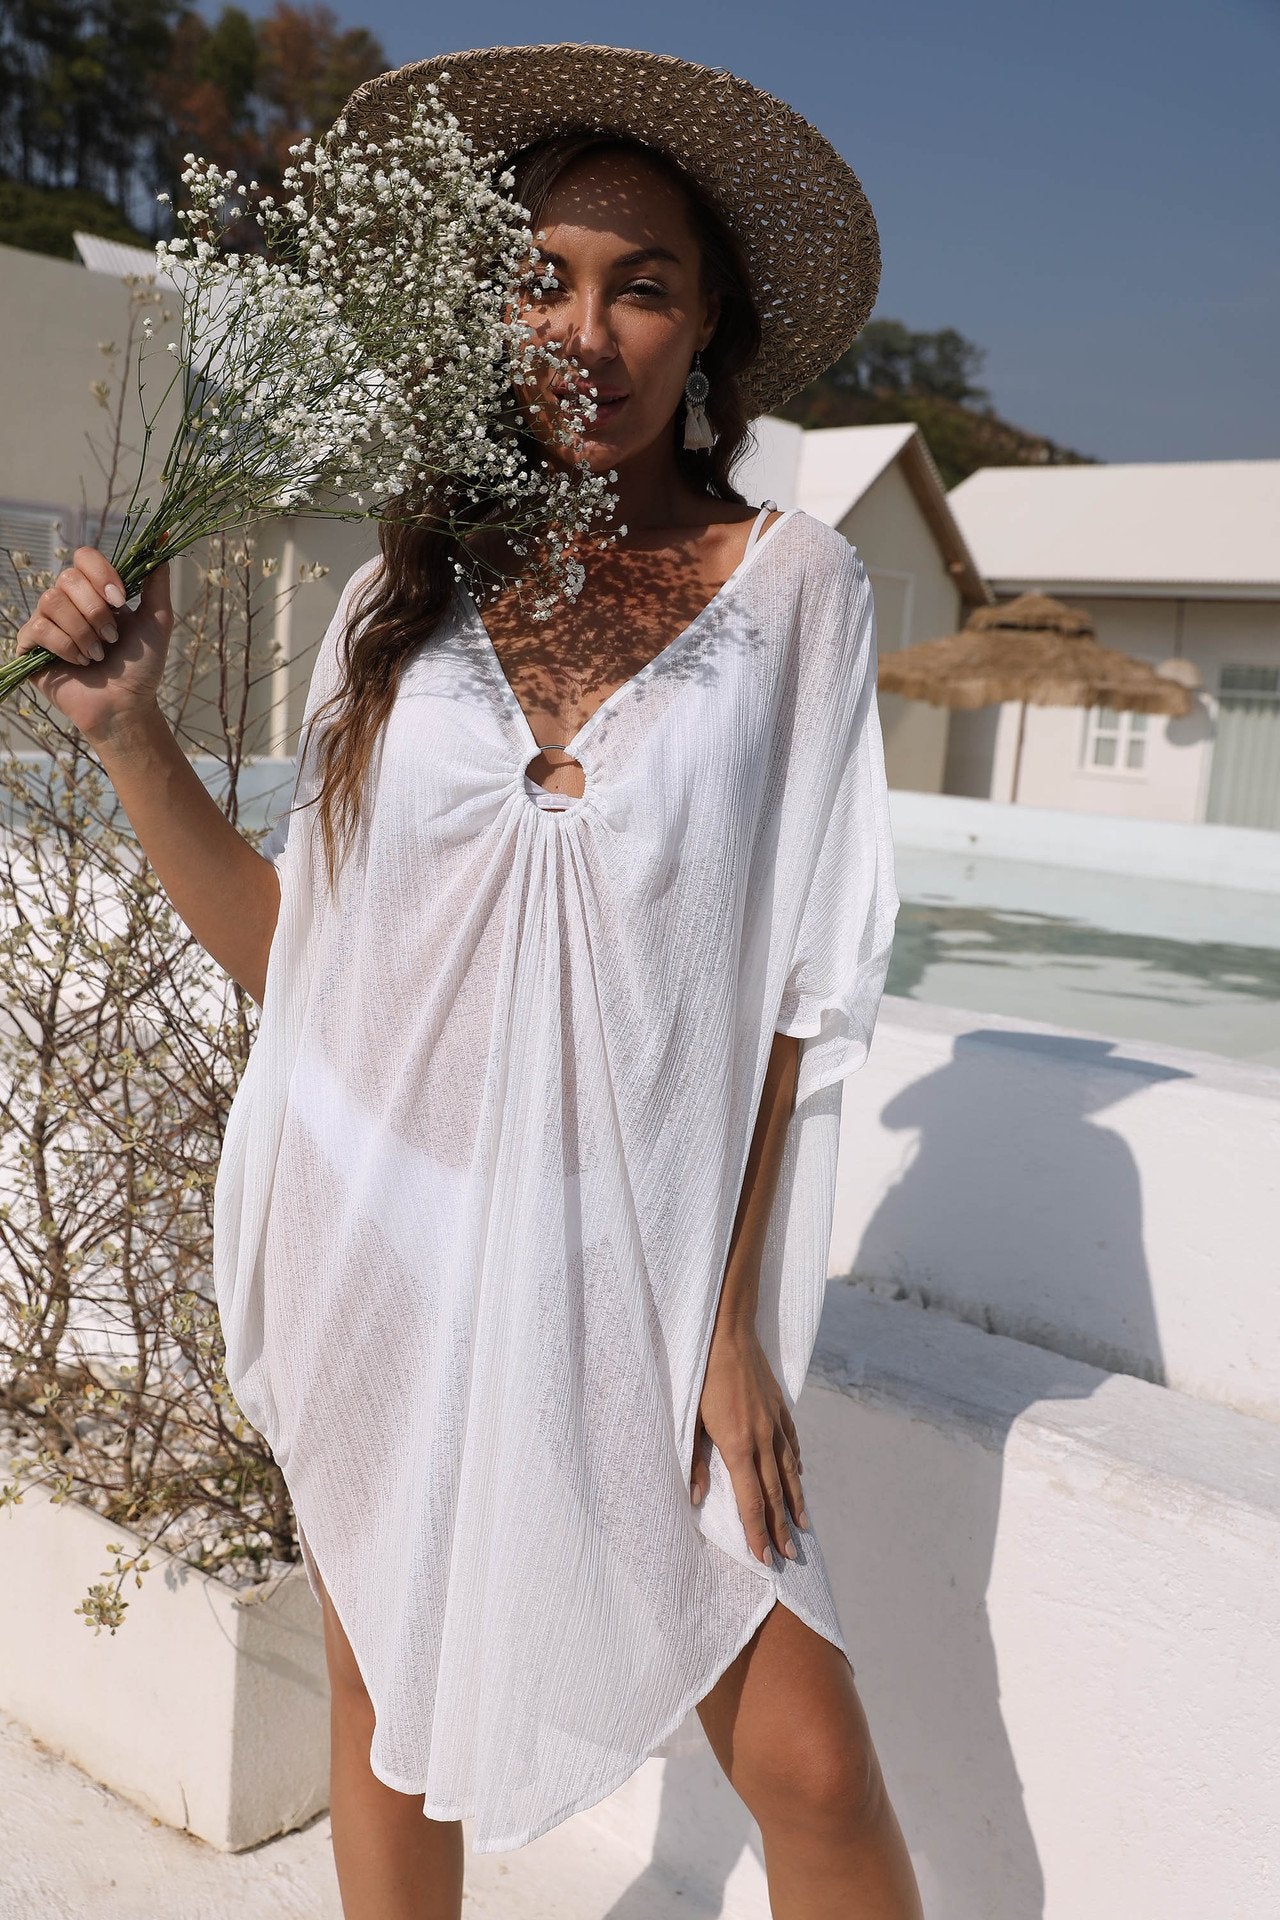 Summer Beach Loose White Cover Ups-White-One Size-Free Shipping at meselling99